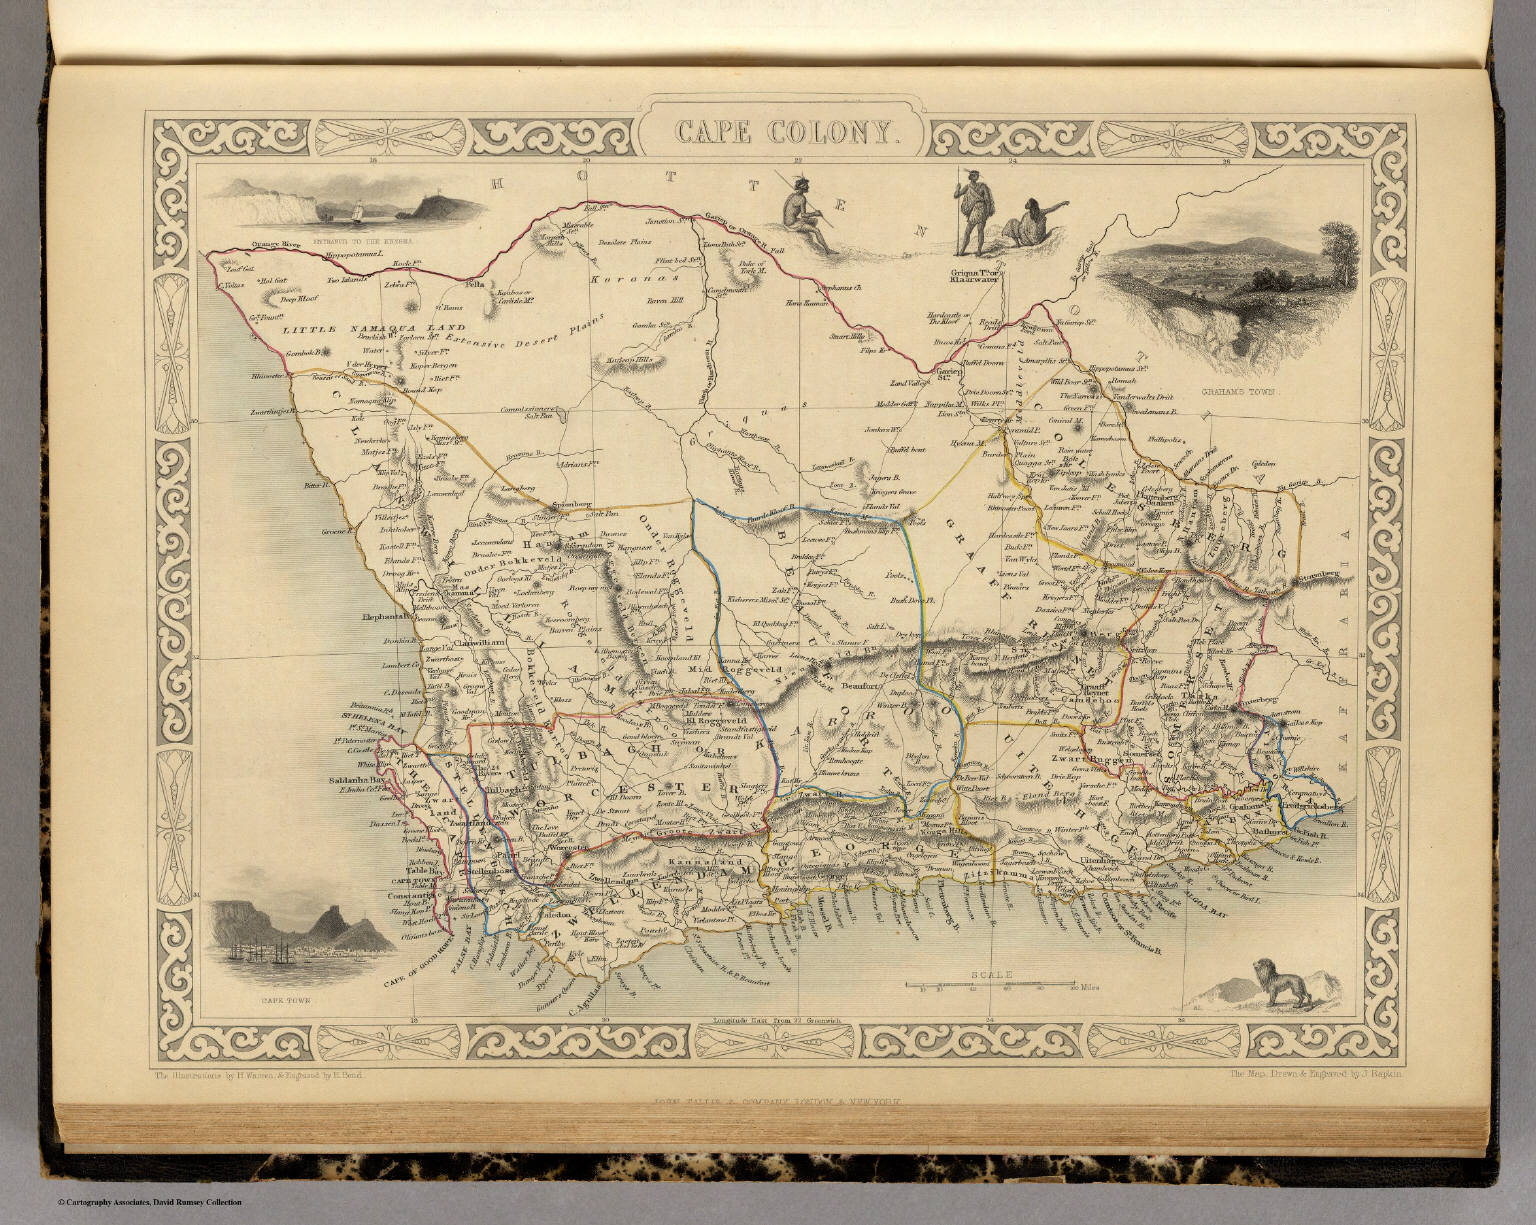 Cape Colony. - David Rumsey Historical Map Collection